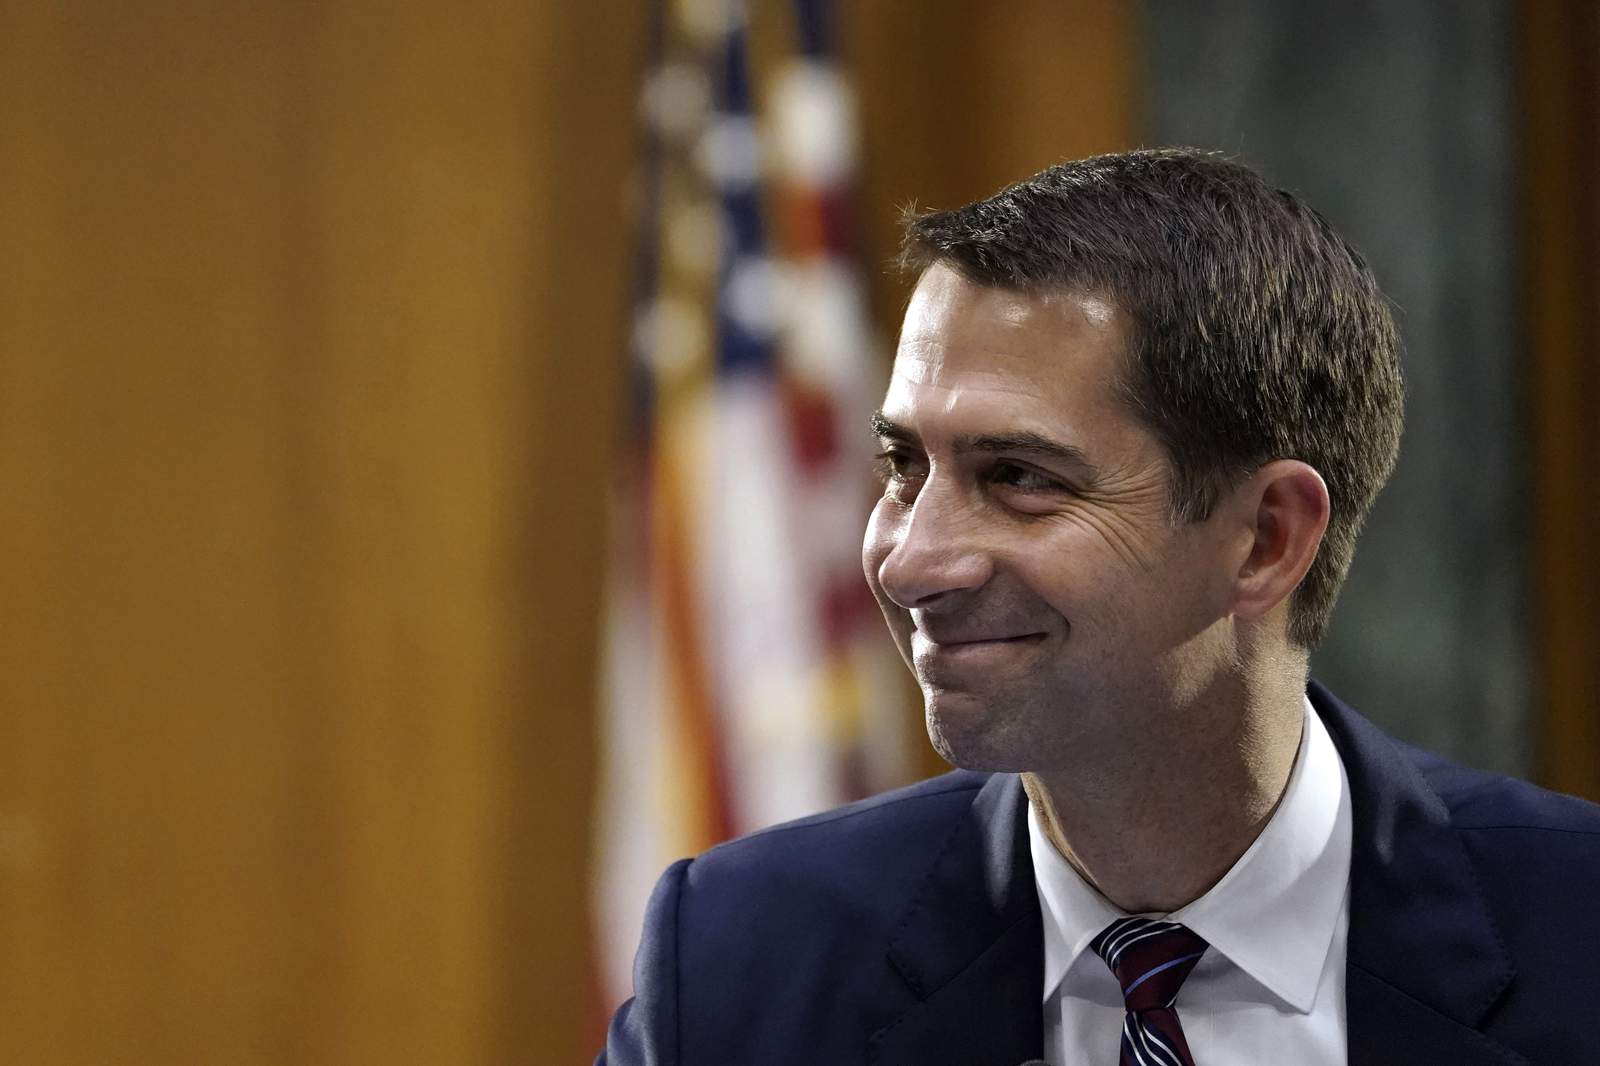 Tom Cotton is campaigning hard, just not for reelection